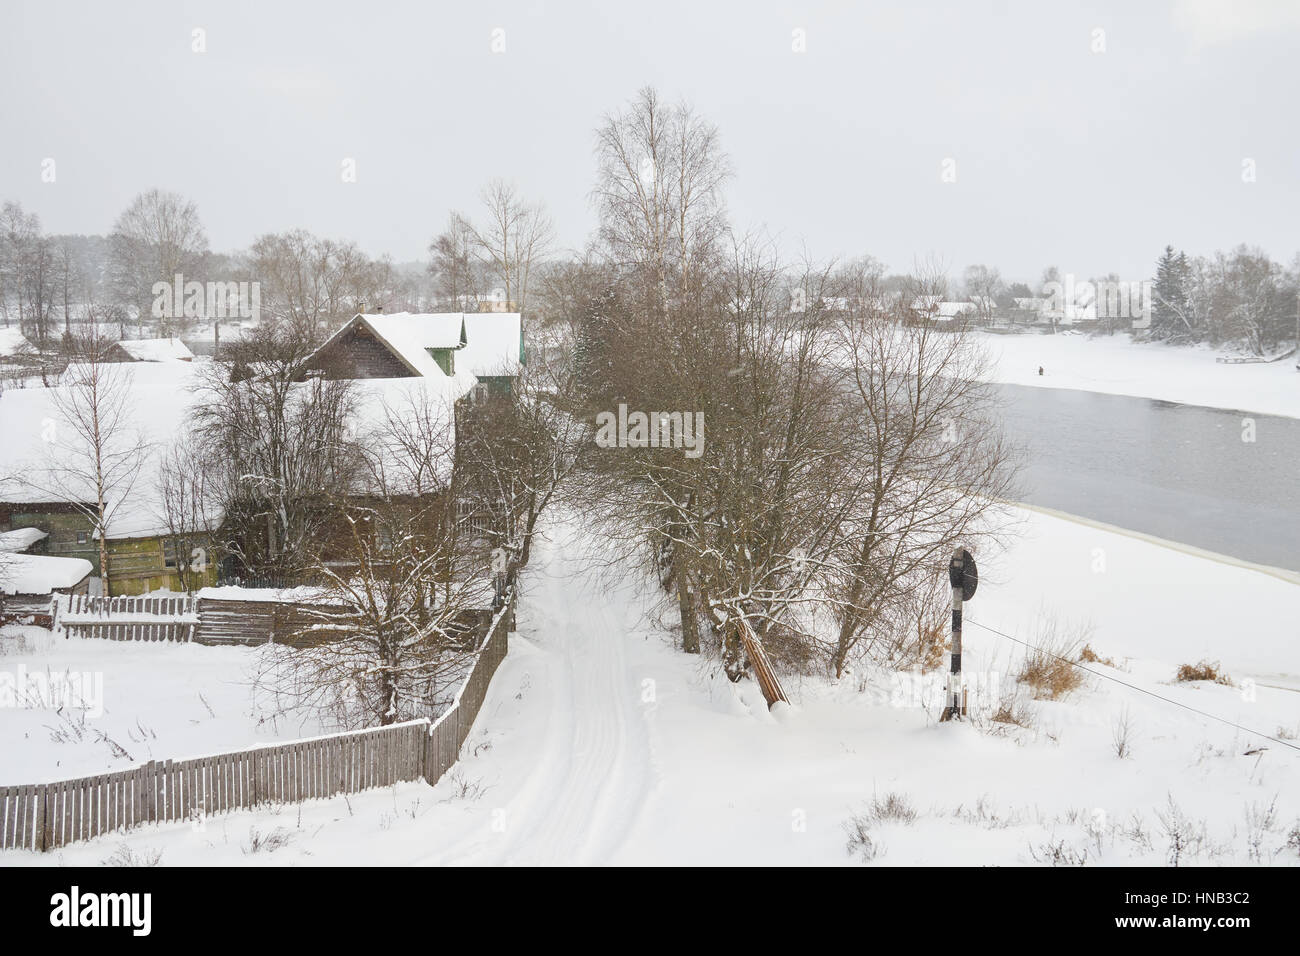 Winter view on russian town Peno, Tver oblast, Russia. The river is upper Volga. There is a fisherman doing ice fishing on the right. Stock Photo